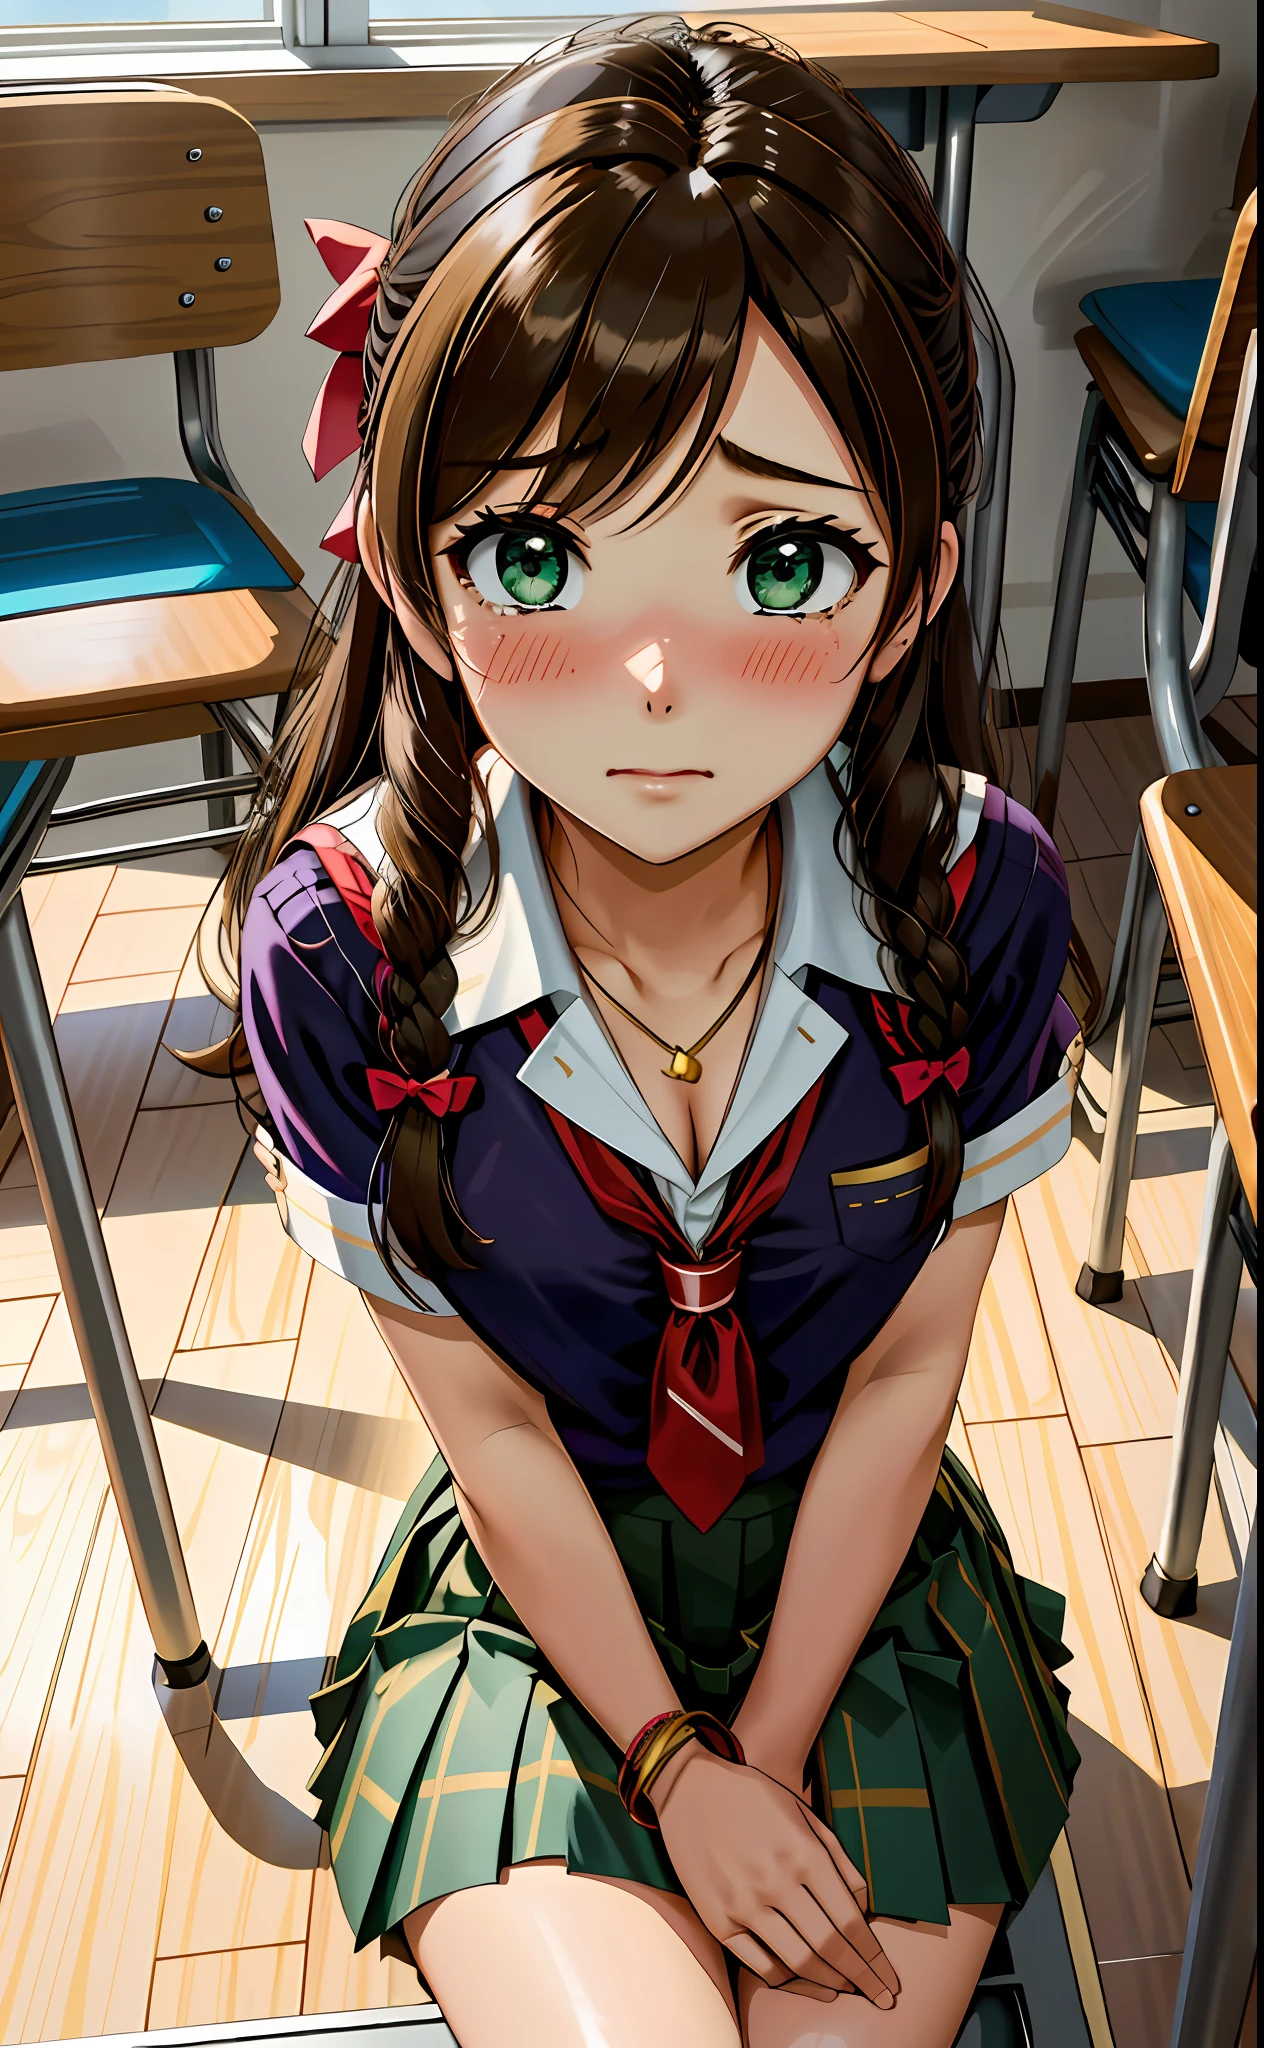 indoors, busy classroom, school desk with chair, sitting, other students sitting in class, a3r1th, upskirt panties view, legs together, a3r1th, peeing, peeing herself, perfect female figure, Aerith Gainsborough, pantyhose, holding pen, green eyes, , hair bow, bracelet,  skirt, looking down nervously, shy, embarrassed, sad, crying, aroused, shocked, panicking, worried, very desperate to pee, urination, legs crossed, rape face, full-face blush, high detail, Realism, Hyperrealism, multiple views, perspective, ccurate, masterpiece, highres, UHD, anatomically correct, super detail, best quality, highres, 8k